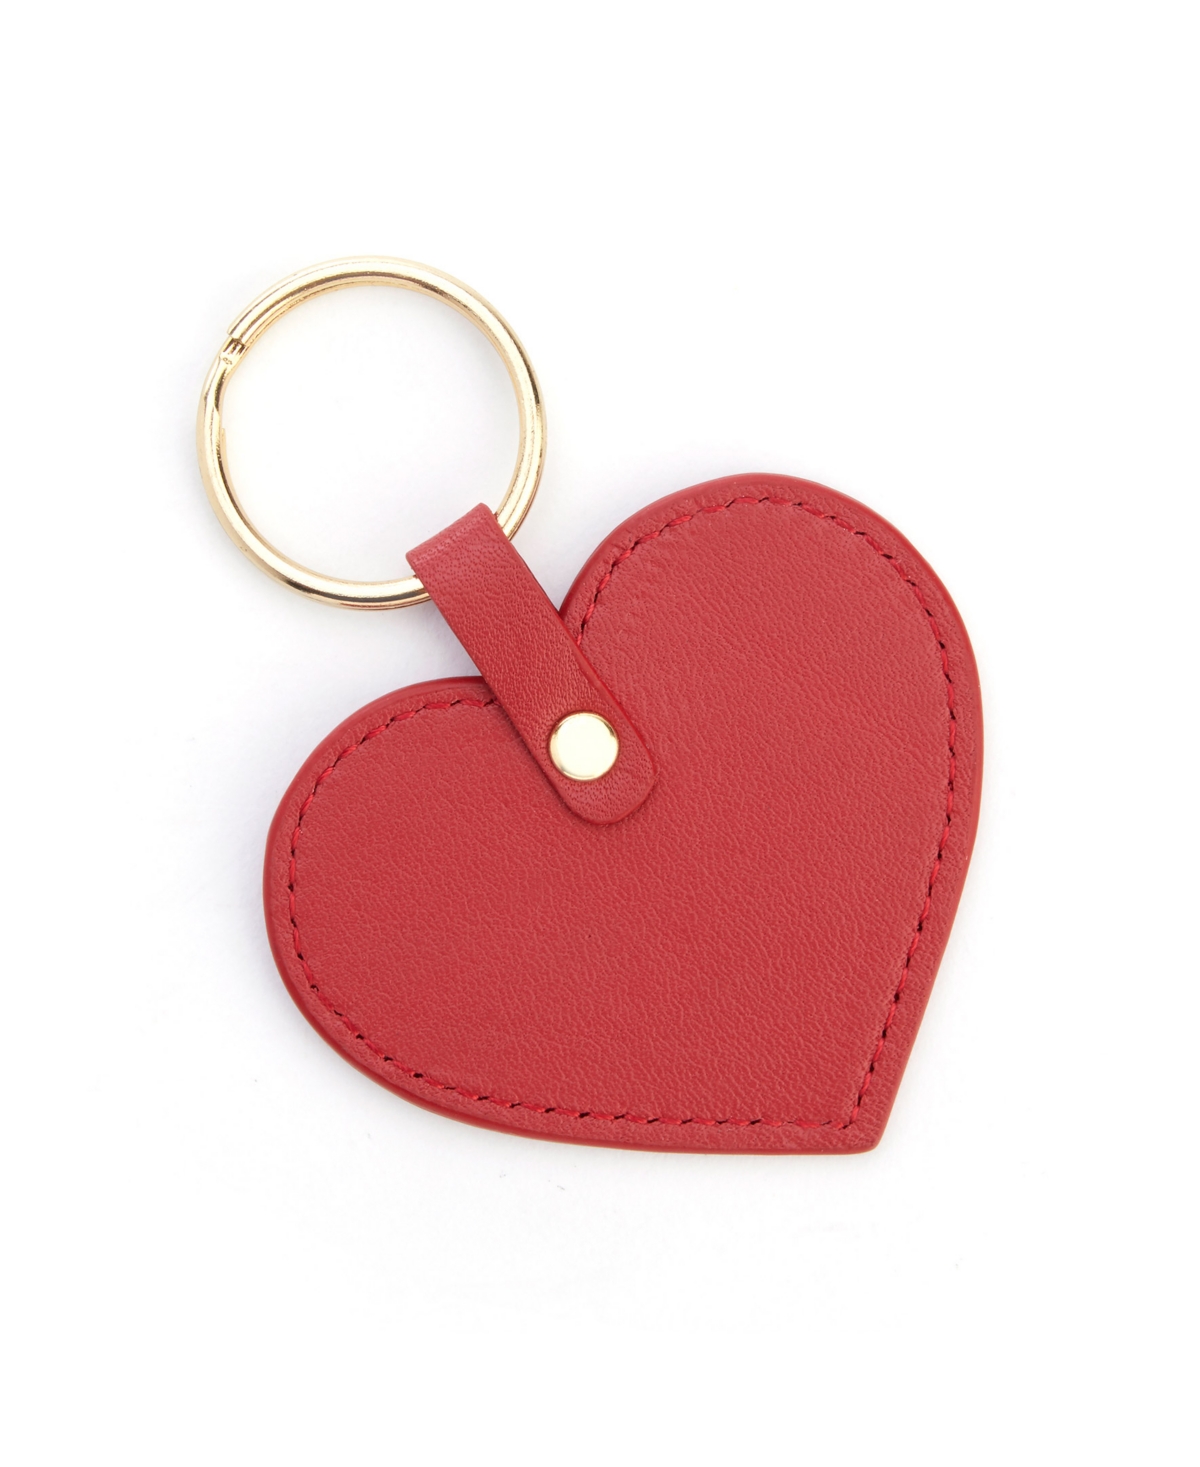 Heart Shaped Leather Key Fob - Red